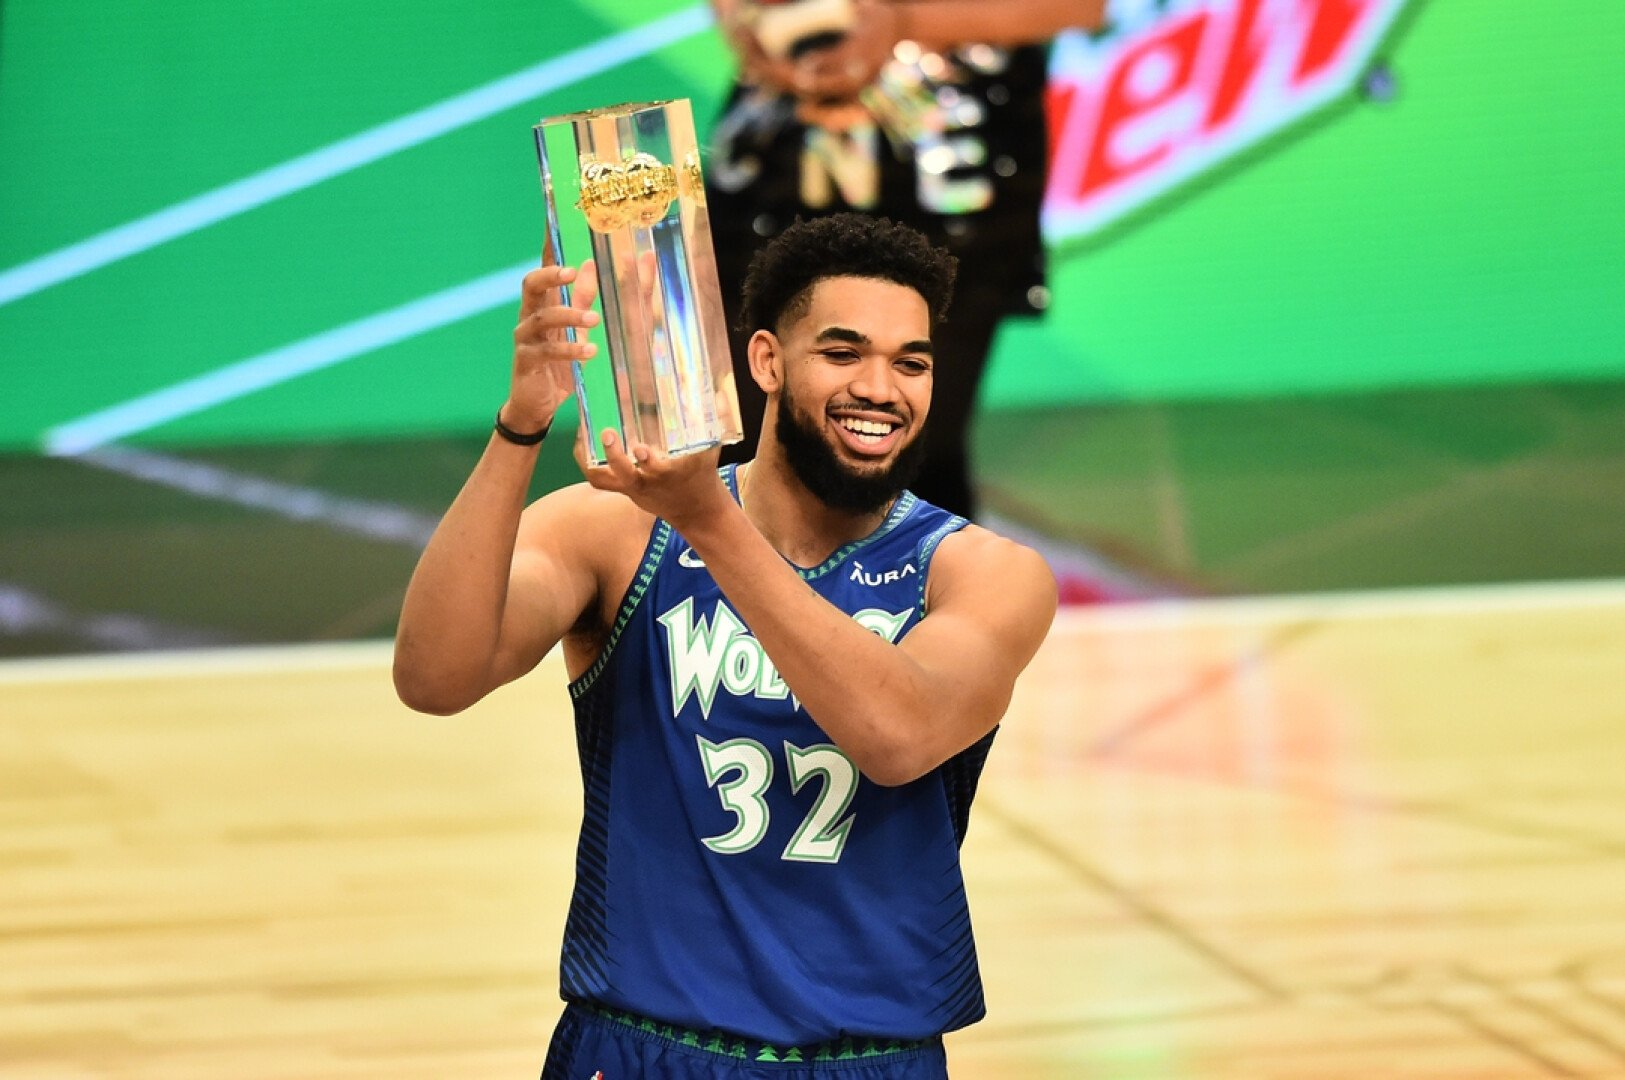 Towns’ Win in 3-Point Contest Highlights All-Star Weekend